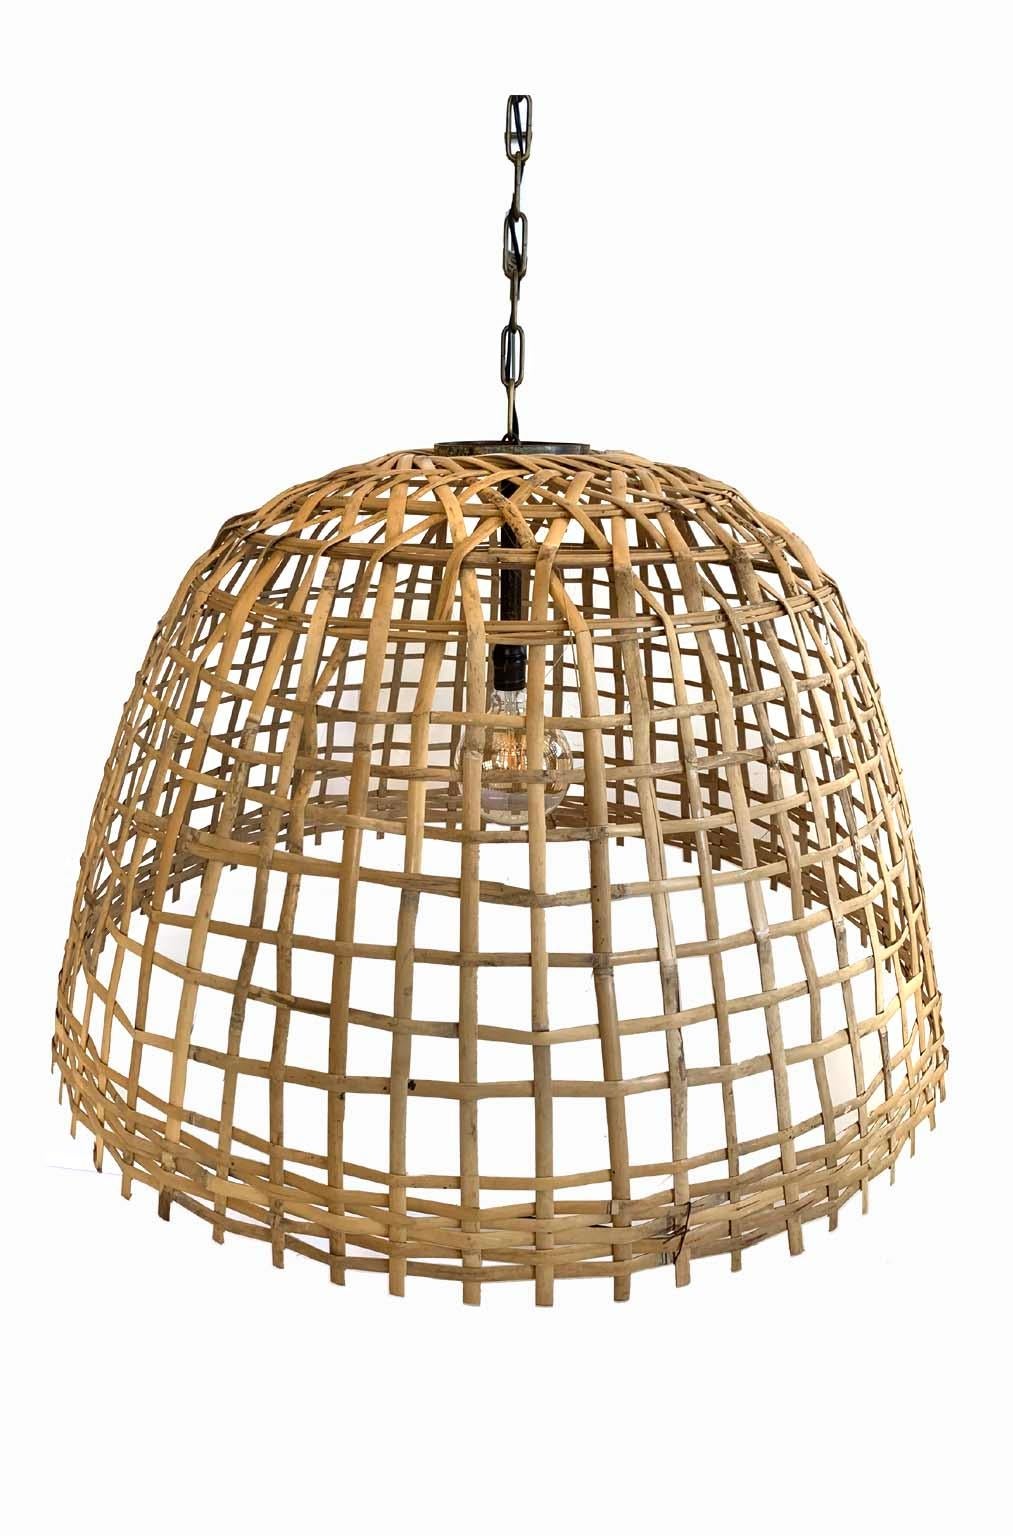 Fish basket vintage chandelier pendant. A beautiful giant fish basket made into to pendant chandelier, well constructed with a wonderful lite airy look. You can use any standard bulb, shon here with an Edison bulb.